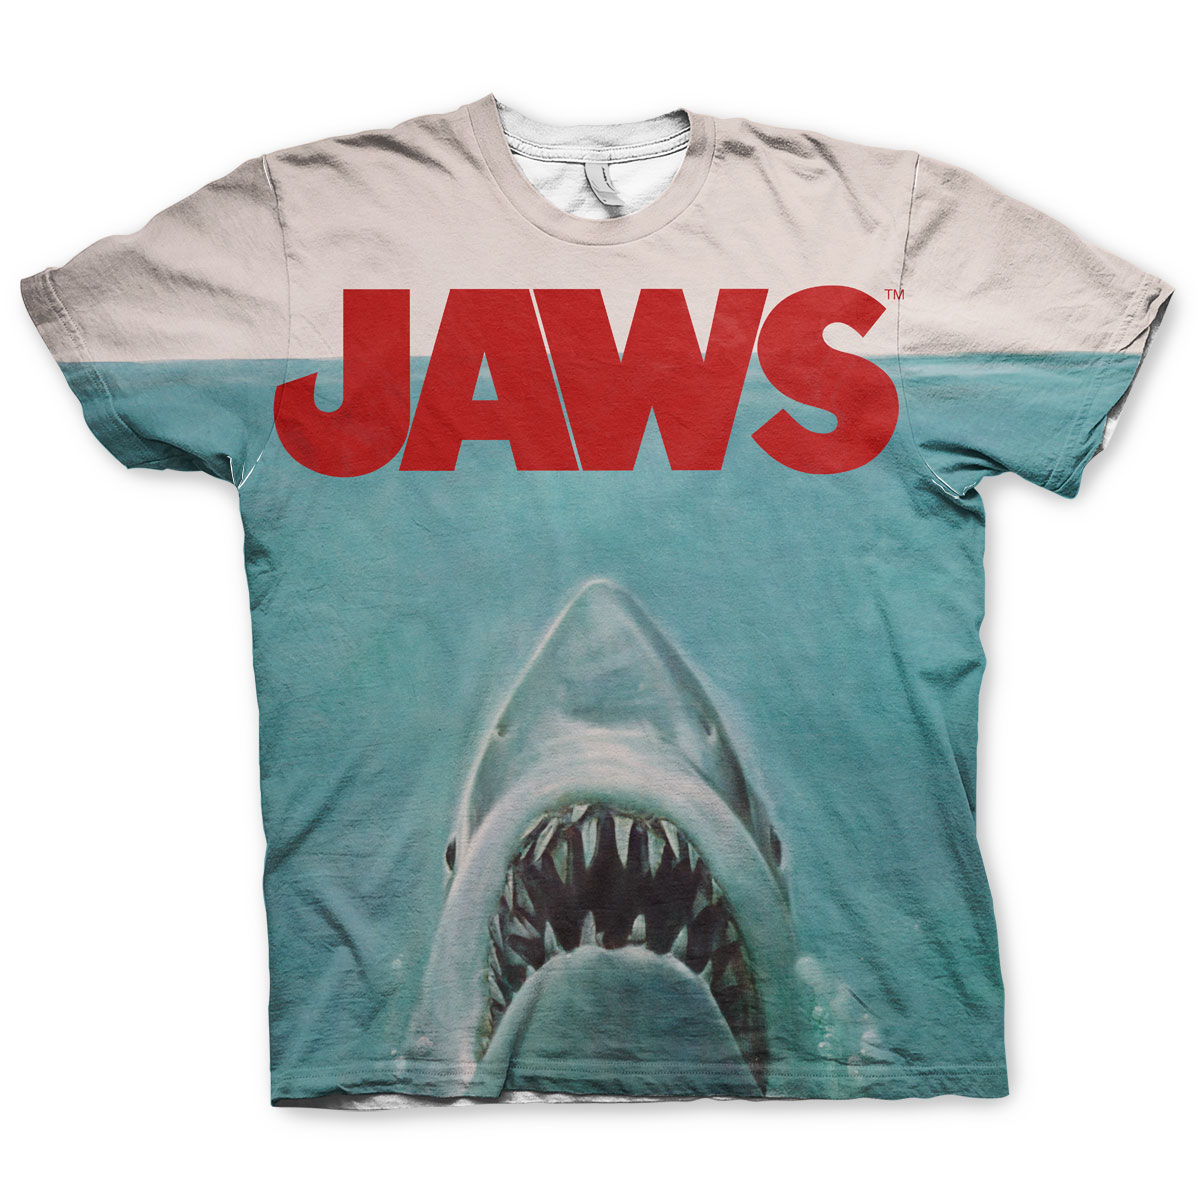 Jaws Graphic Poster Adult Regular Fit T-Shirt